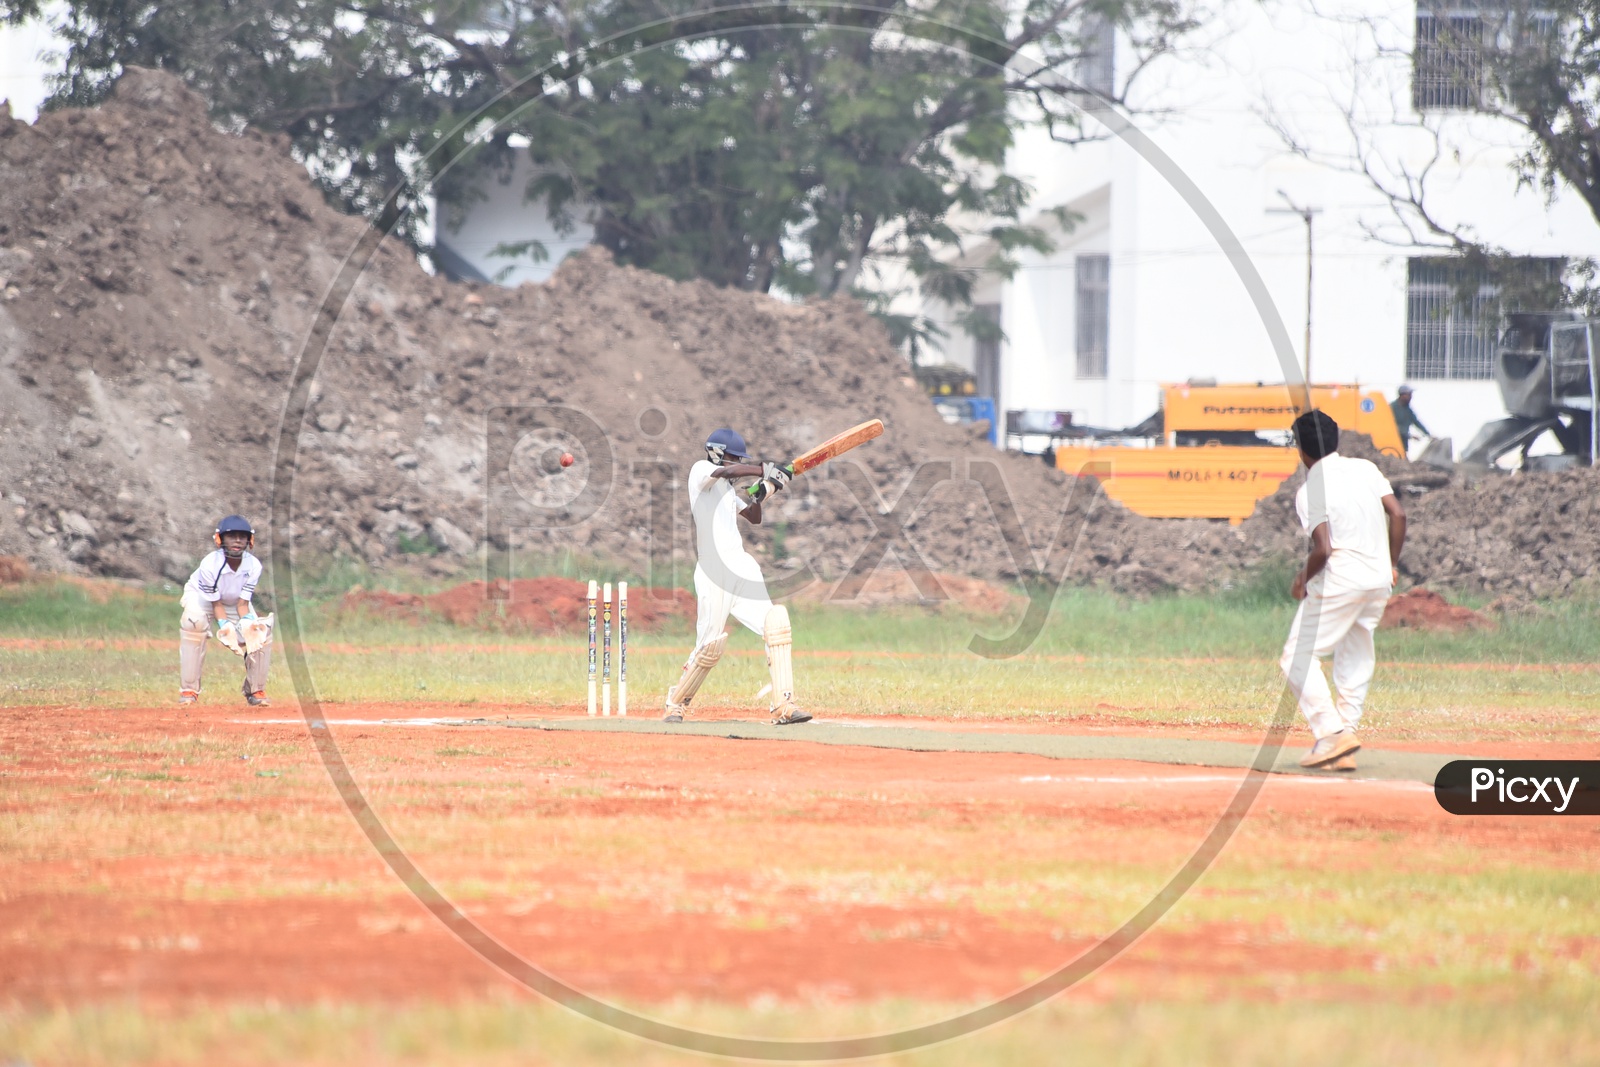 School cricket players playing in the ground